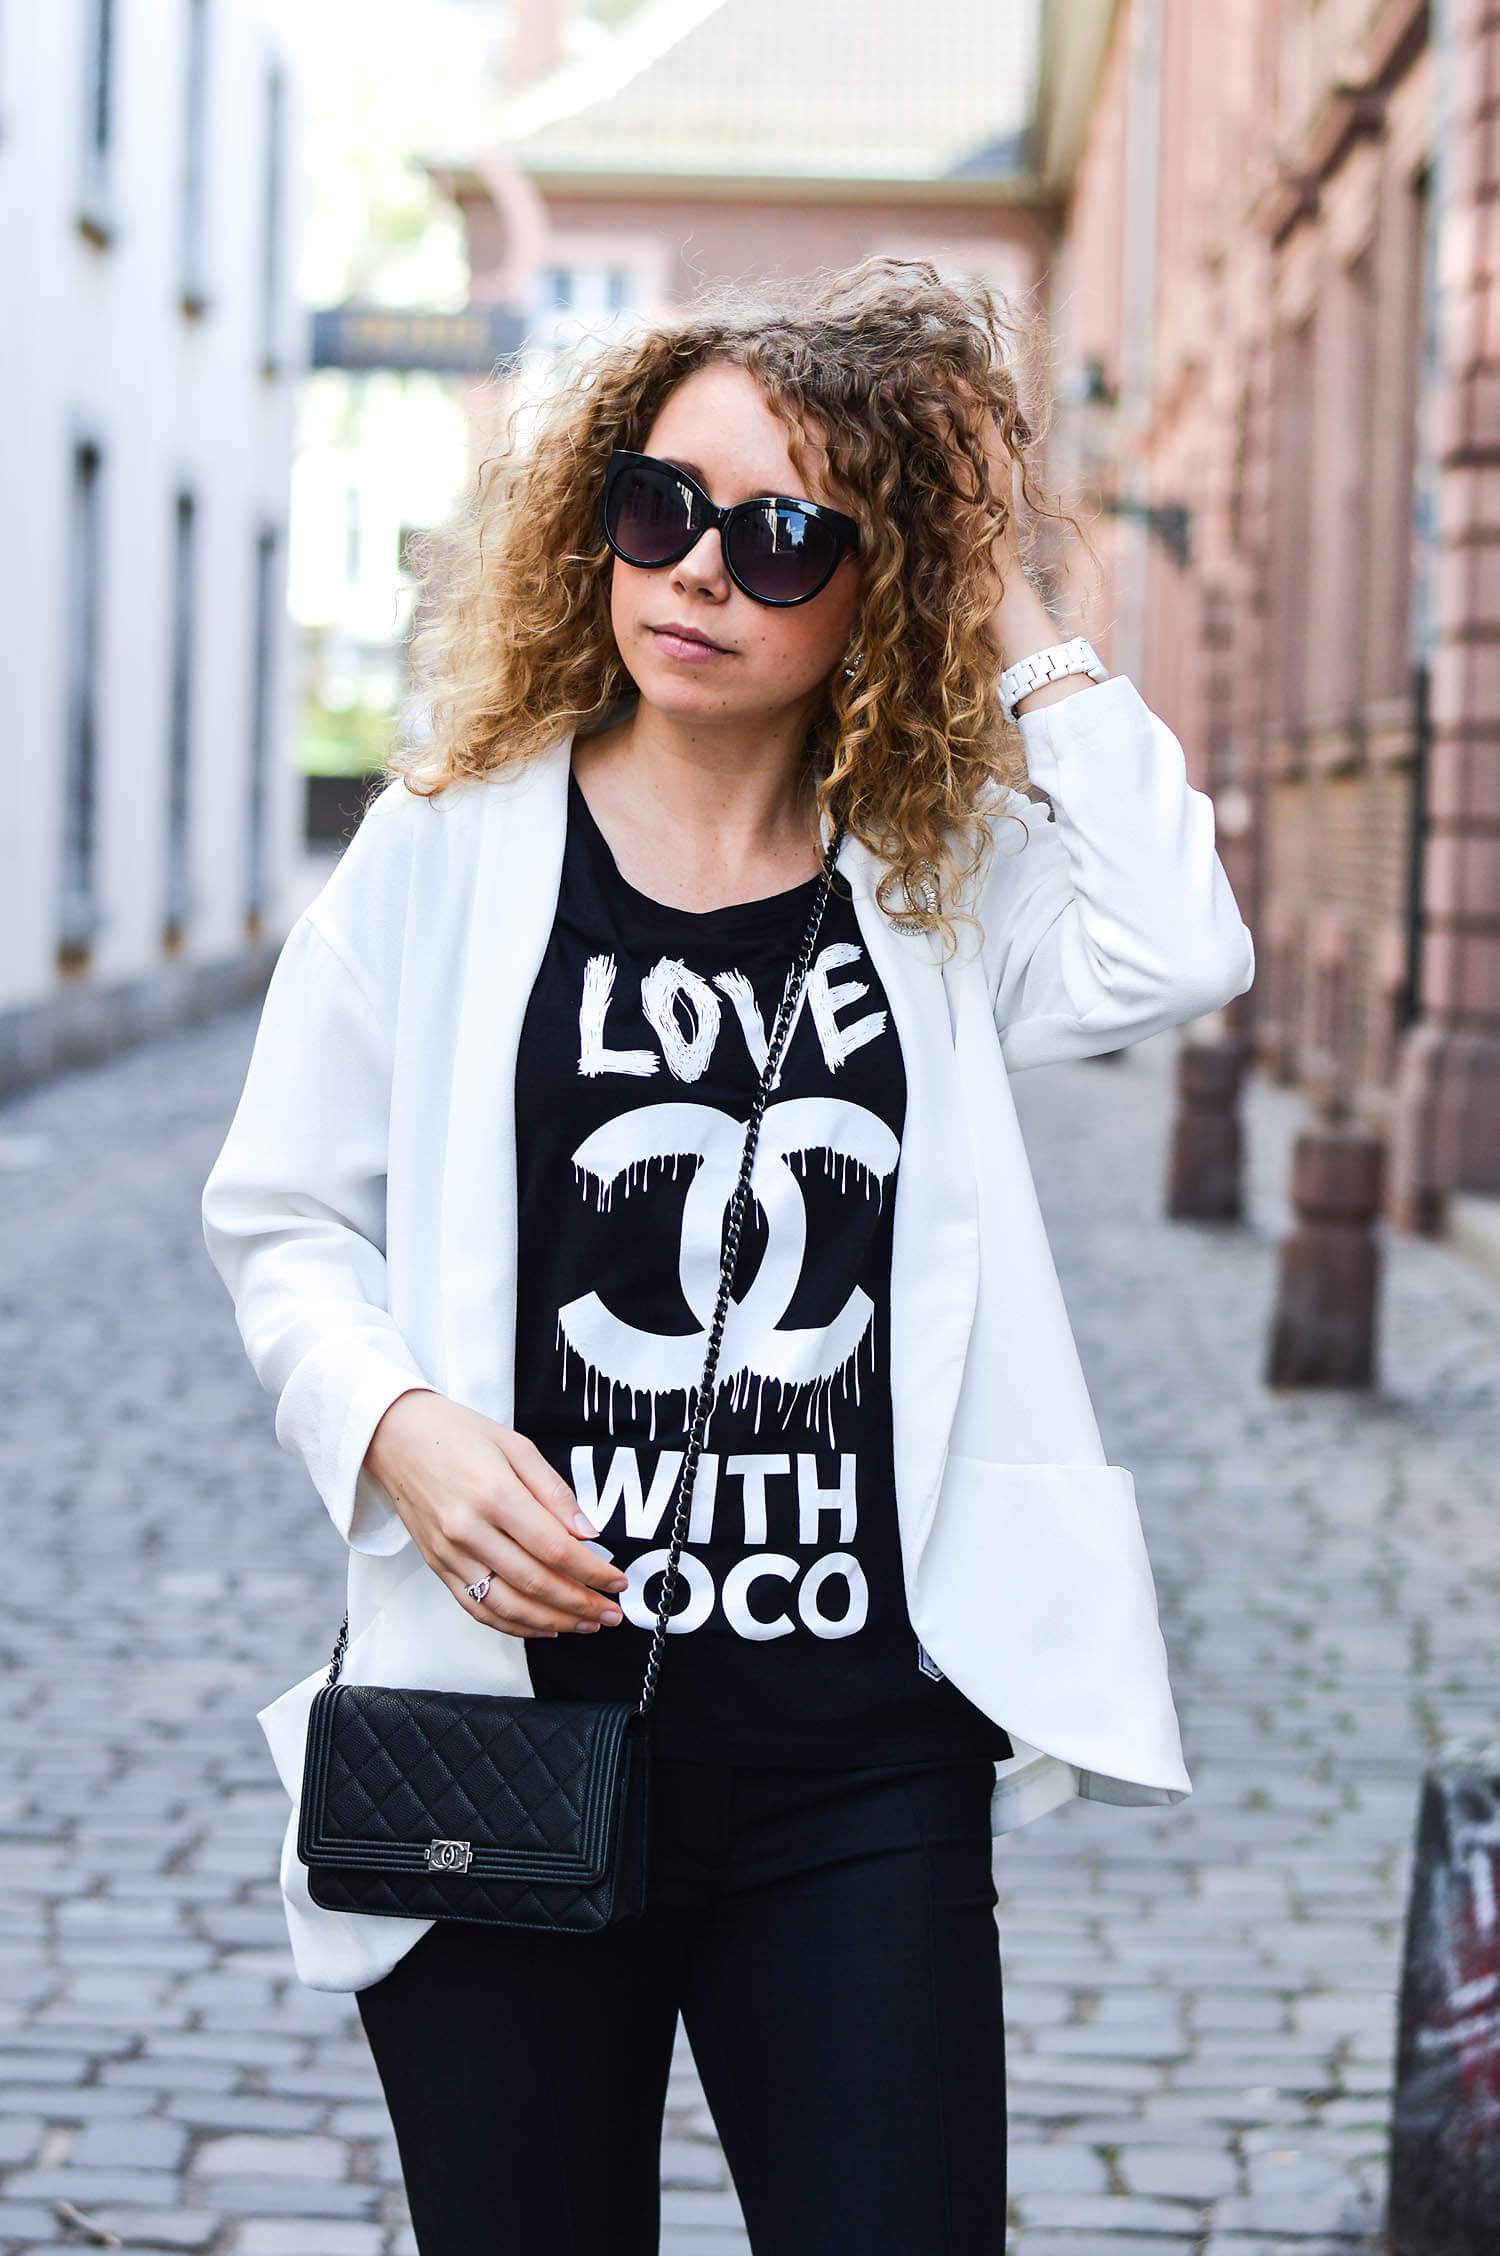 Kationette-fashionblog-Outfit-Coco-Chanel-streetstyle-blackandwhite-mules